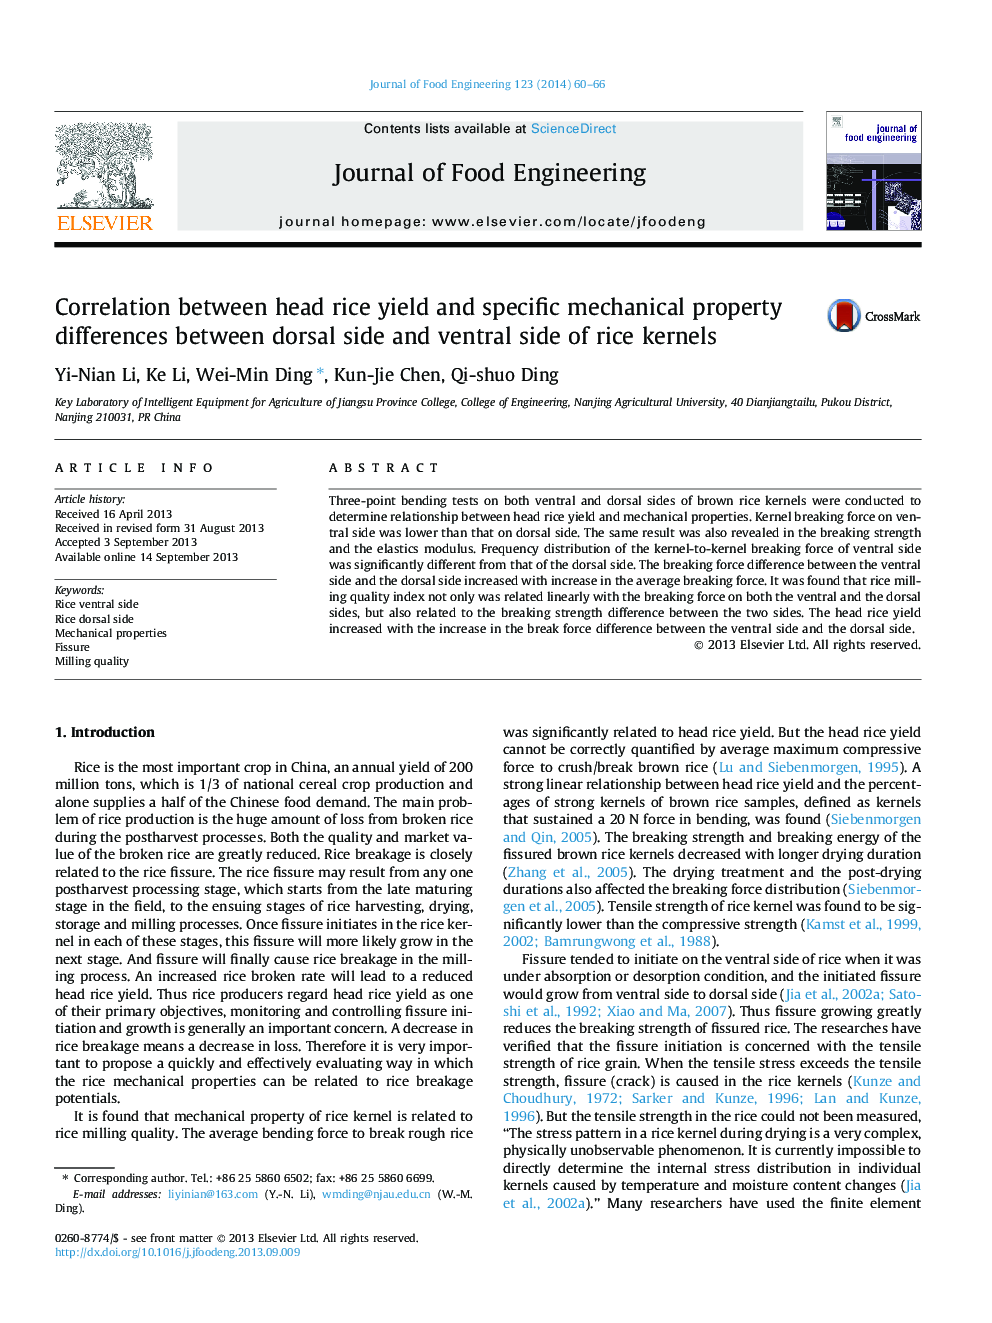 Correlation between head rice yield and specific mechanical property differences between dorsal side and ventral side of rice kernels